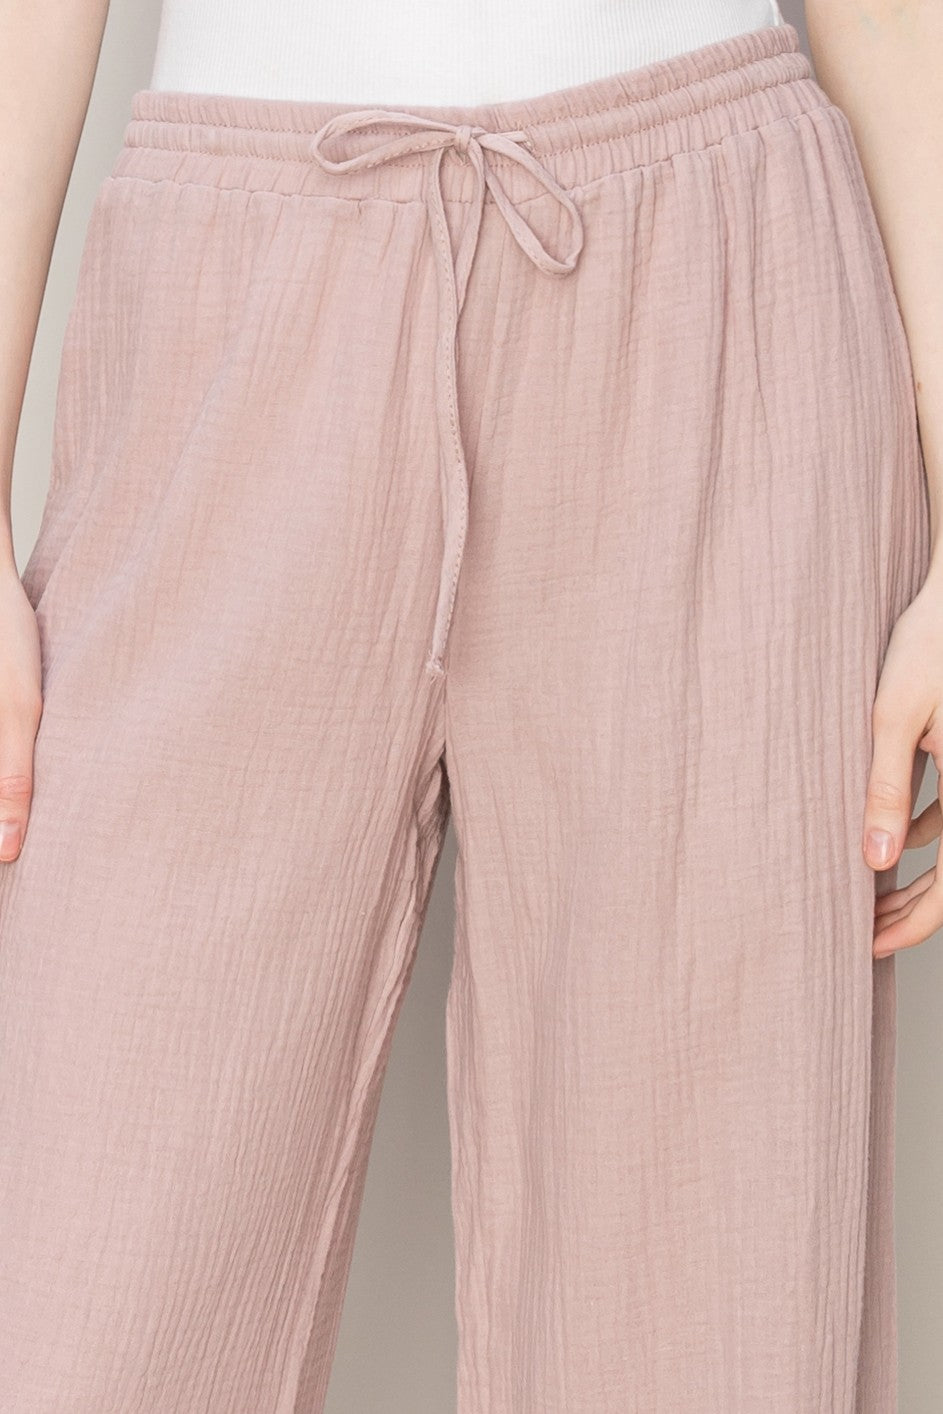 The Downtown Lounge Pants